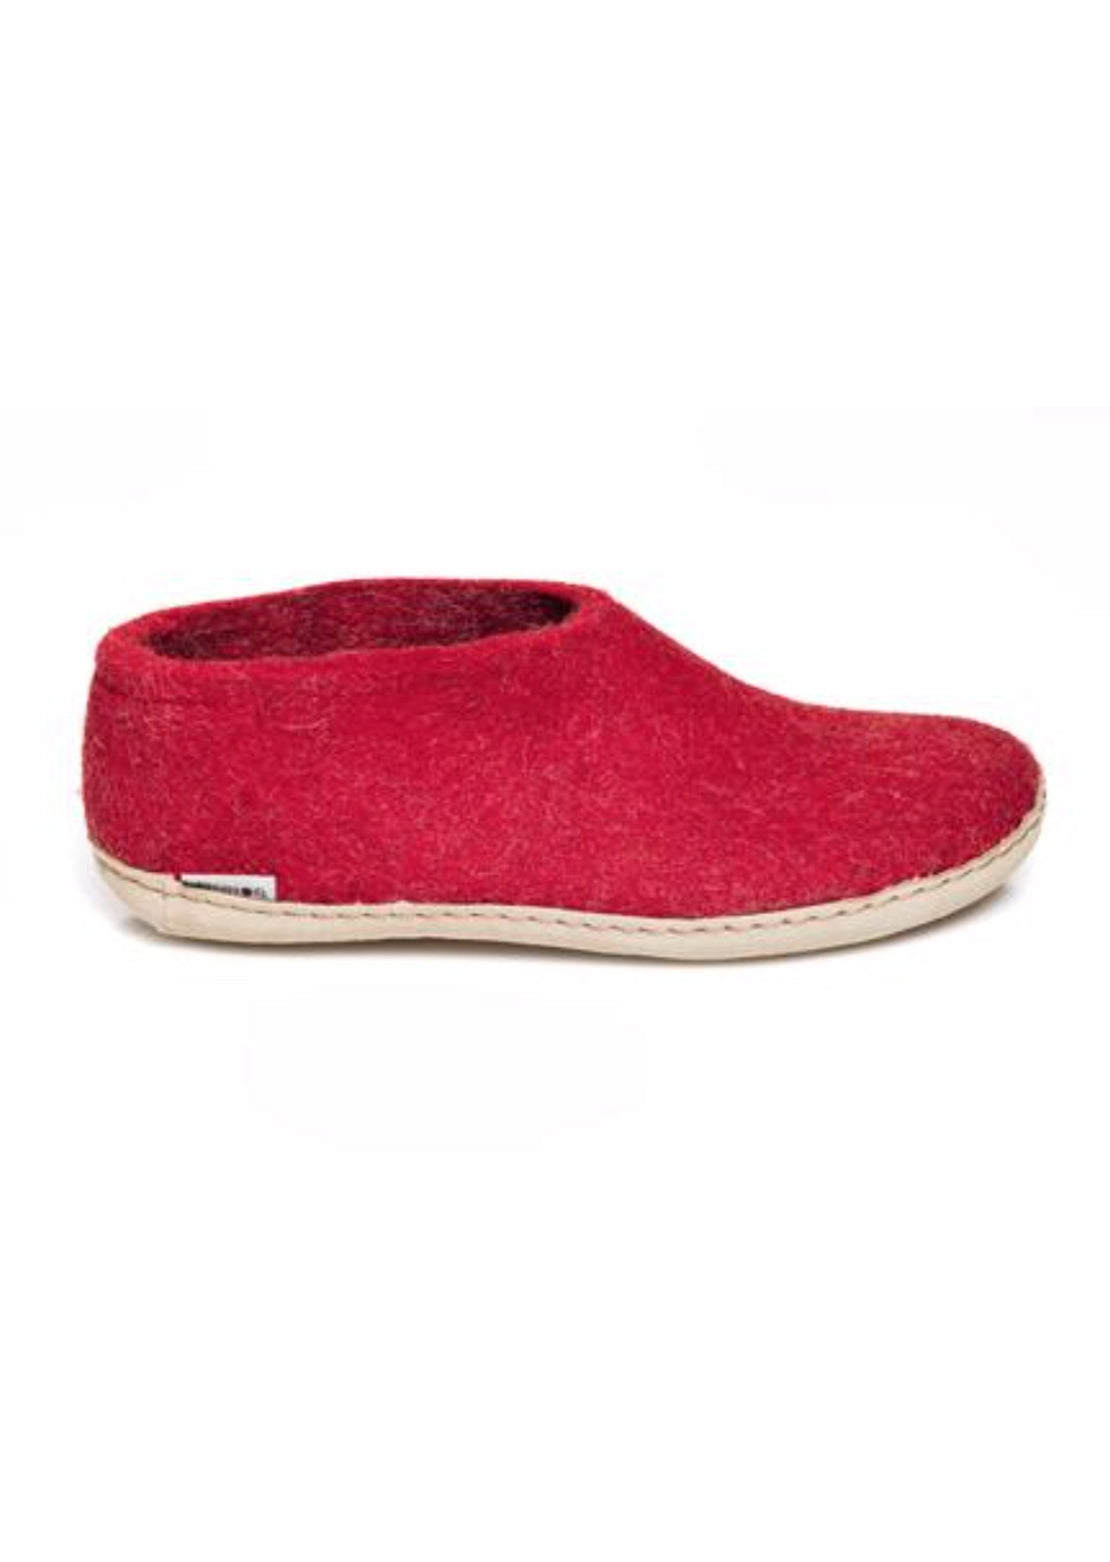 Glerups Unisex Leather Sole Slipper Shoes Red